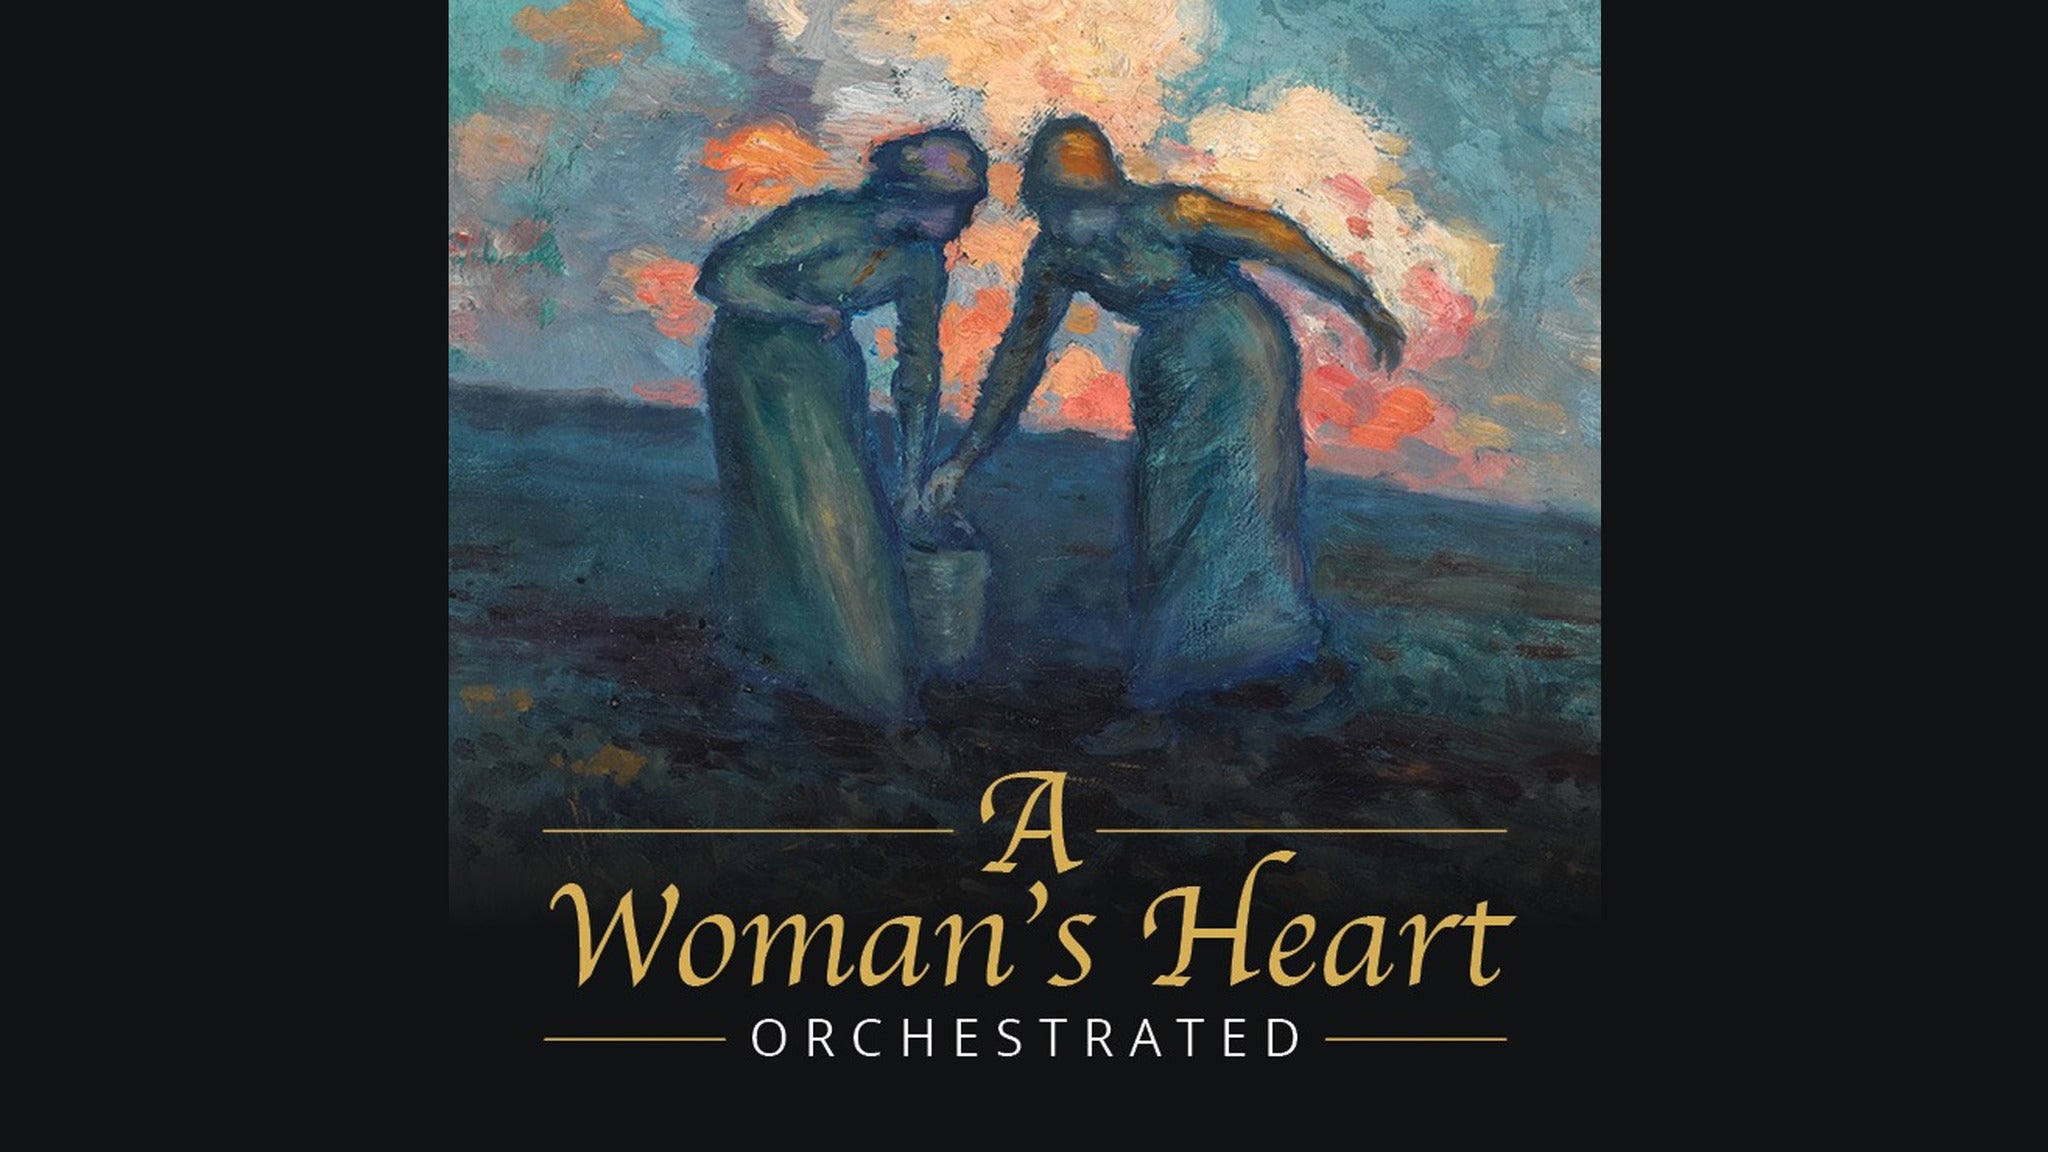 Image used with permission from Ticketmaster | A Womans Heart Orchestrated tickets